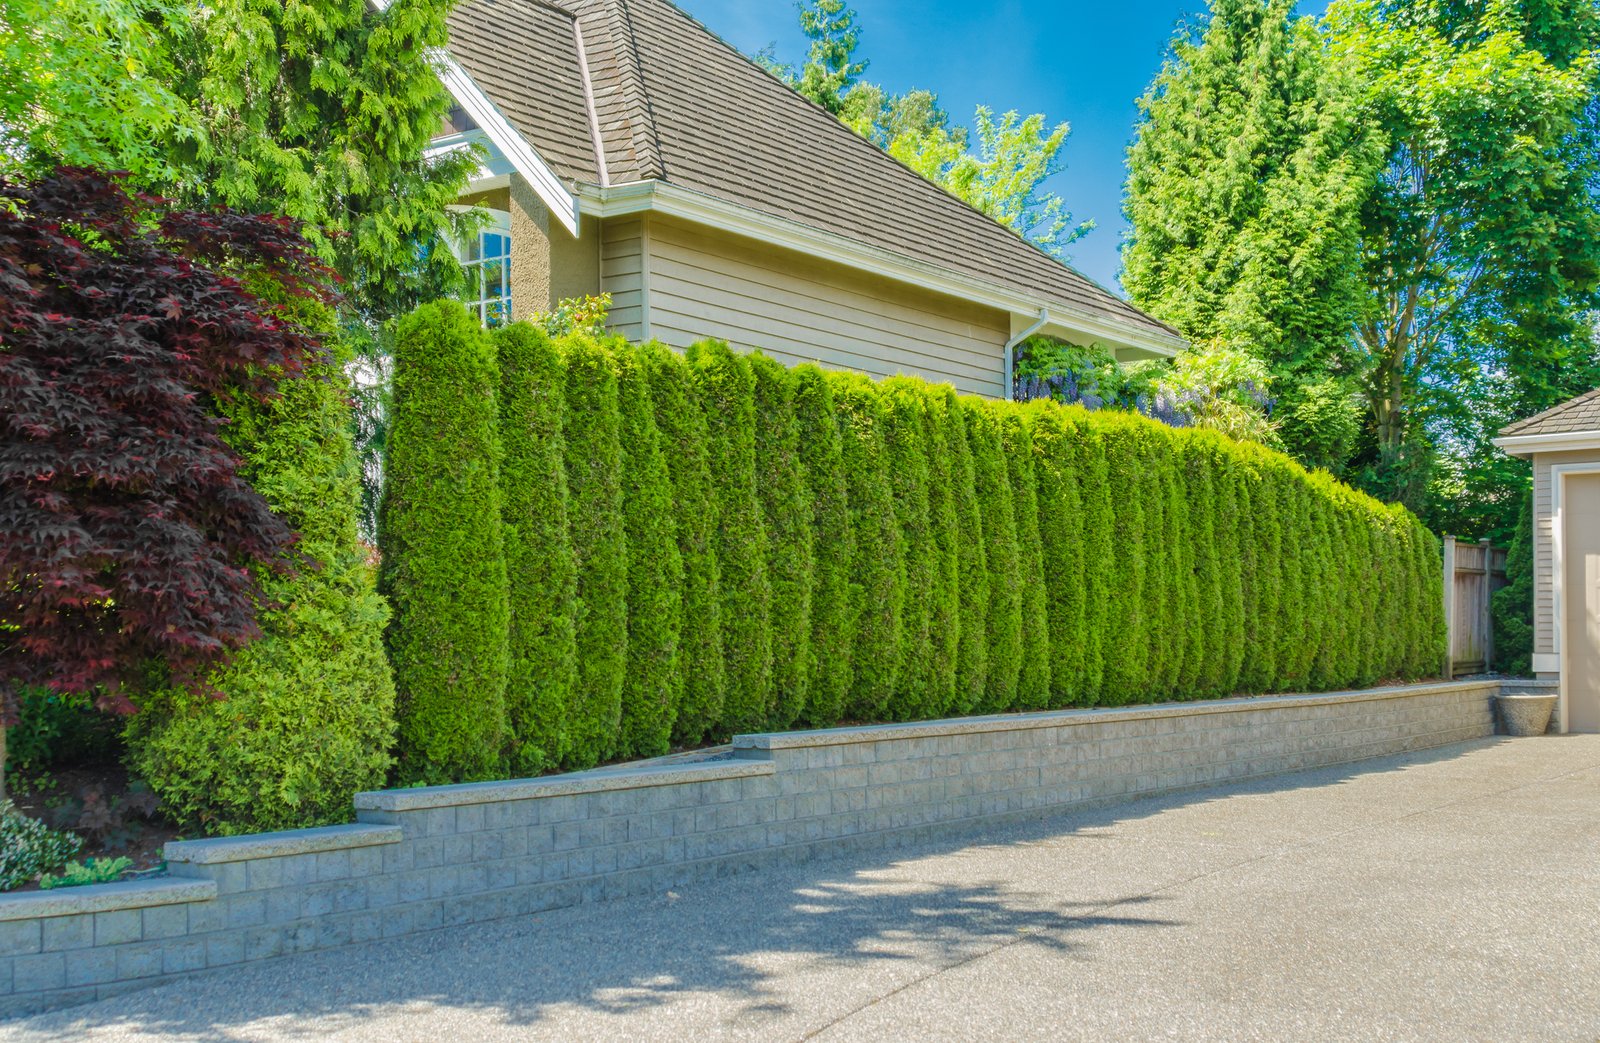 Using evergreen trees is an excellent way to create a sophisticated and effective privacy hedge for your home. This can certainly help increase its resale value.